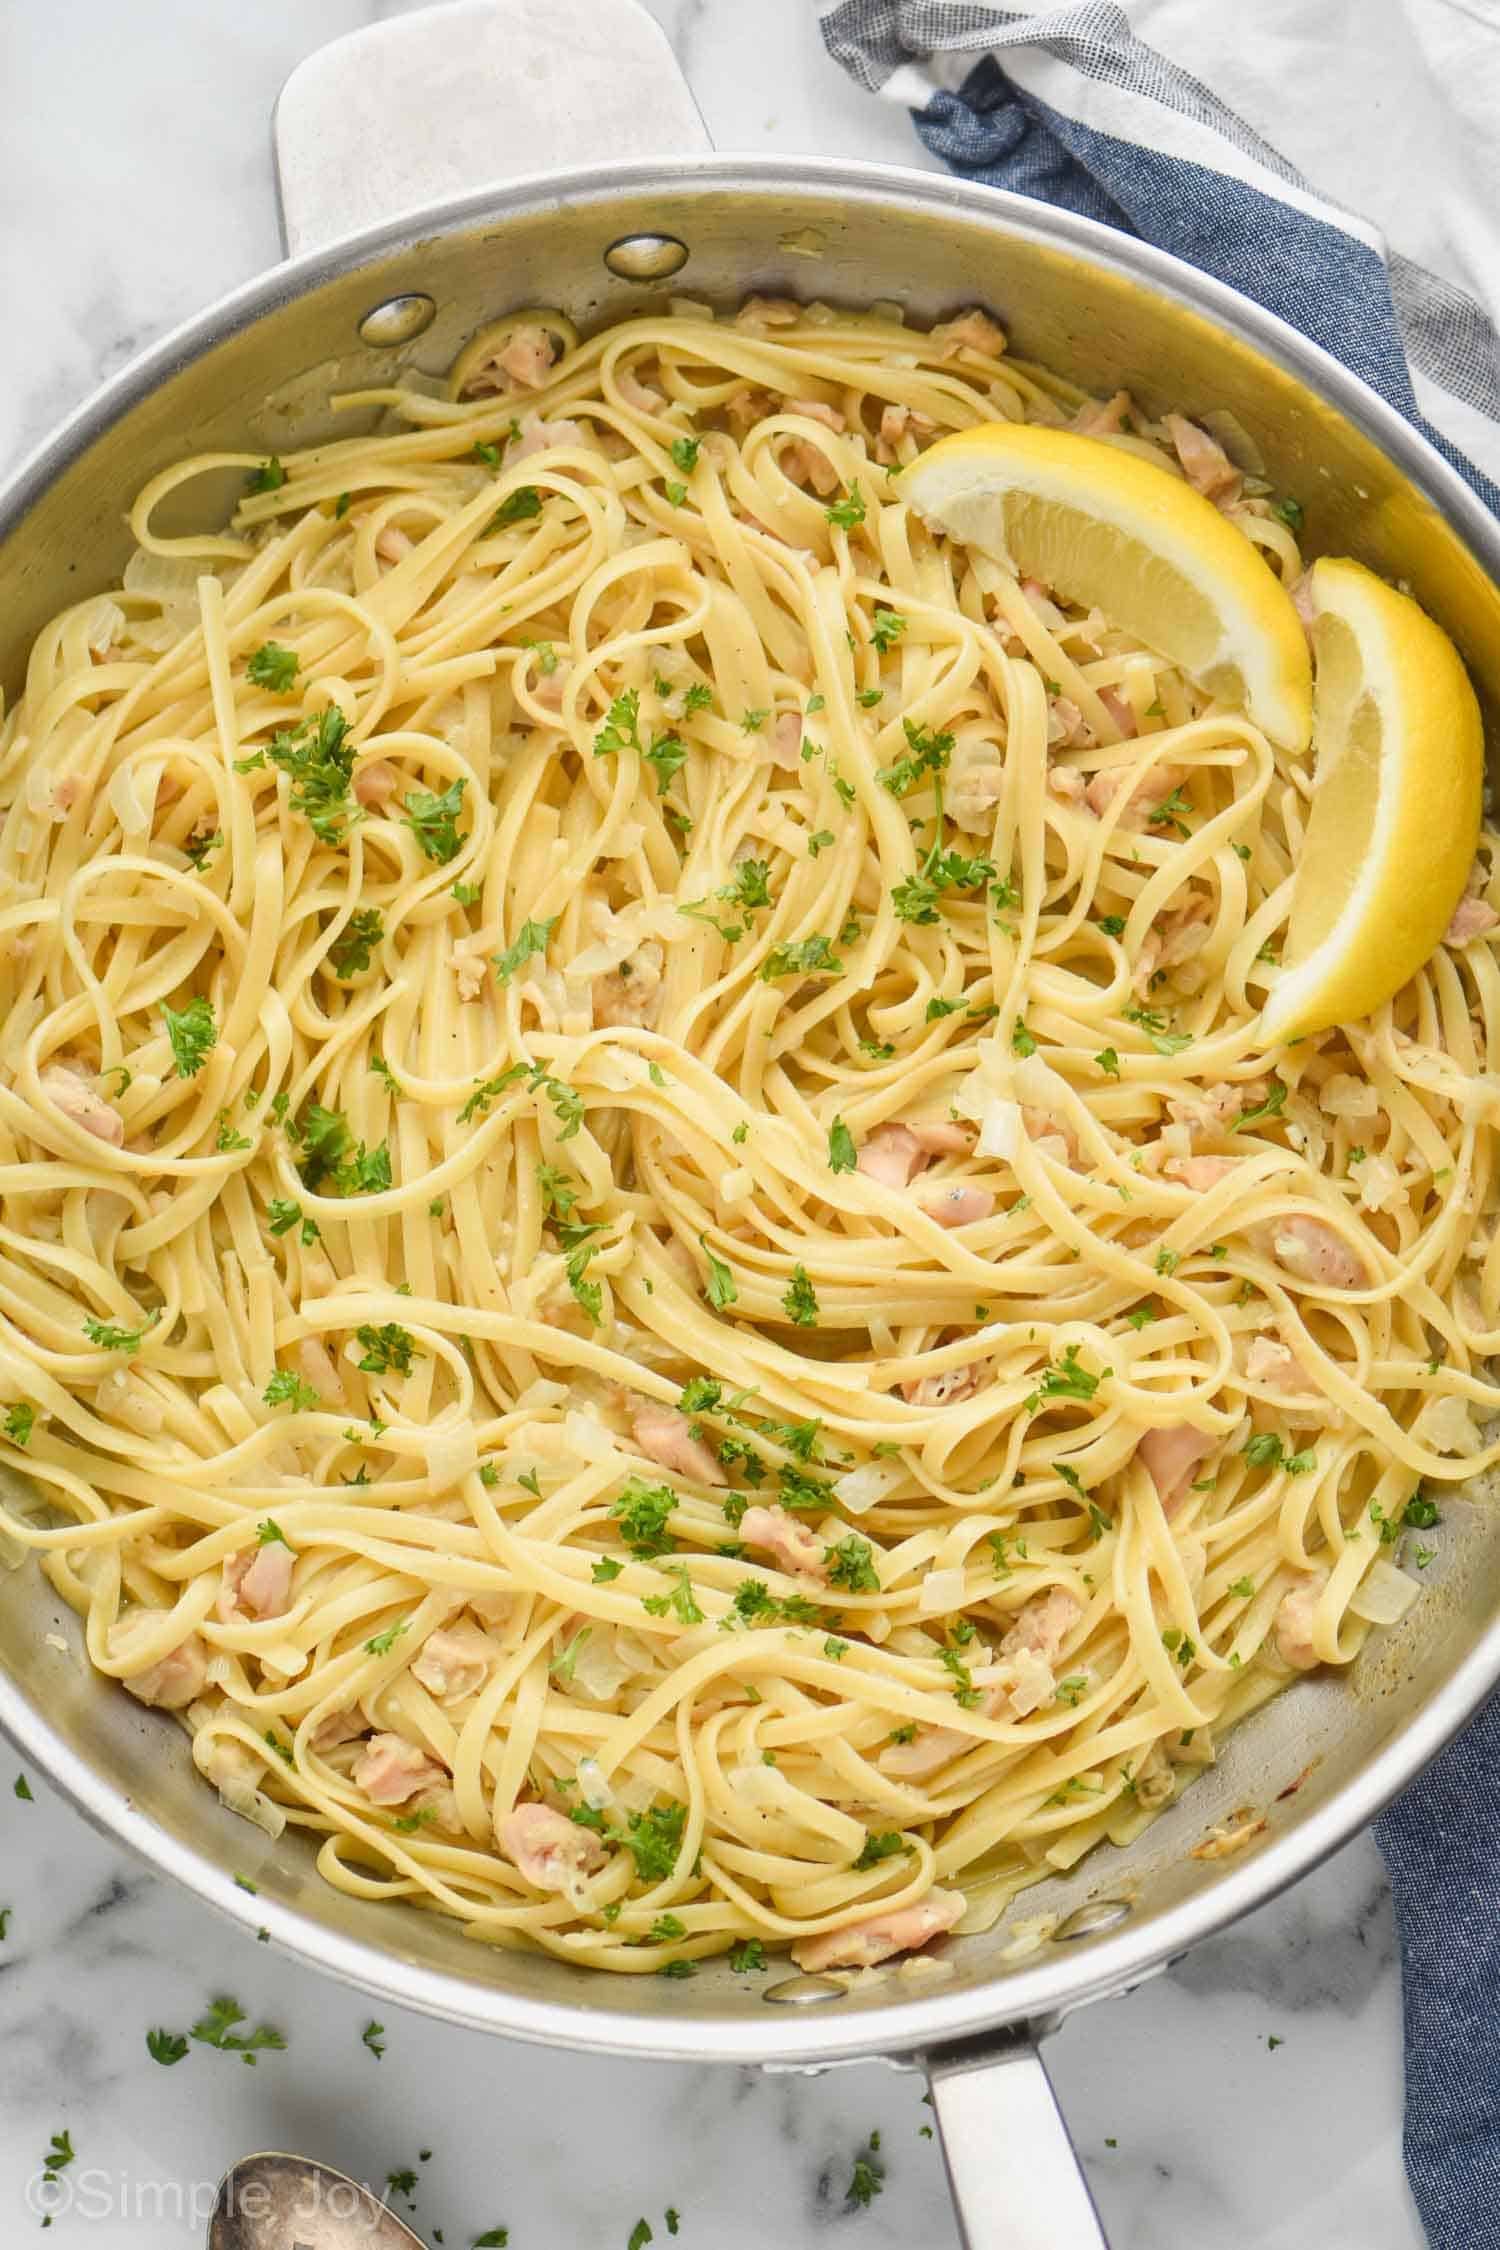 https://www.simplejoy.com/wp-content/uploads/2020/05/linguine-with-clams.jpg